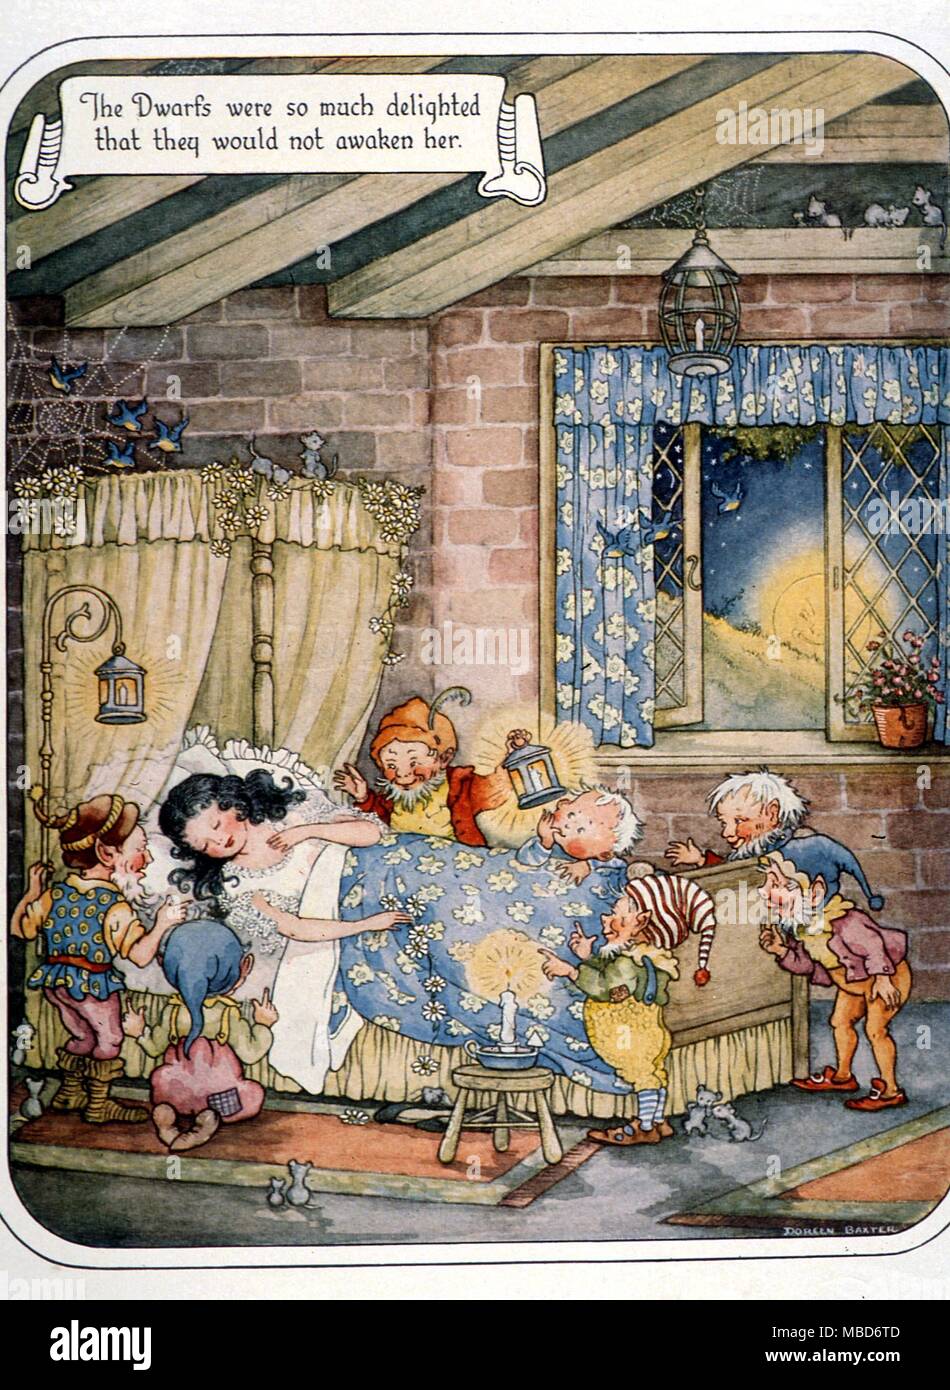 Snow White - The Seven Dwarves are delighted to find Snowwhite sleeping. Illustration by Doreen Baxter. From The Fairy-Tale Omnibus c.1949 Stock Photo